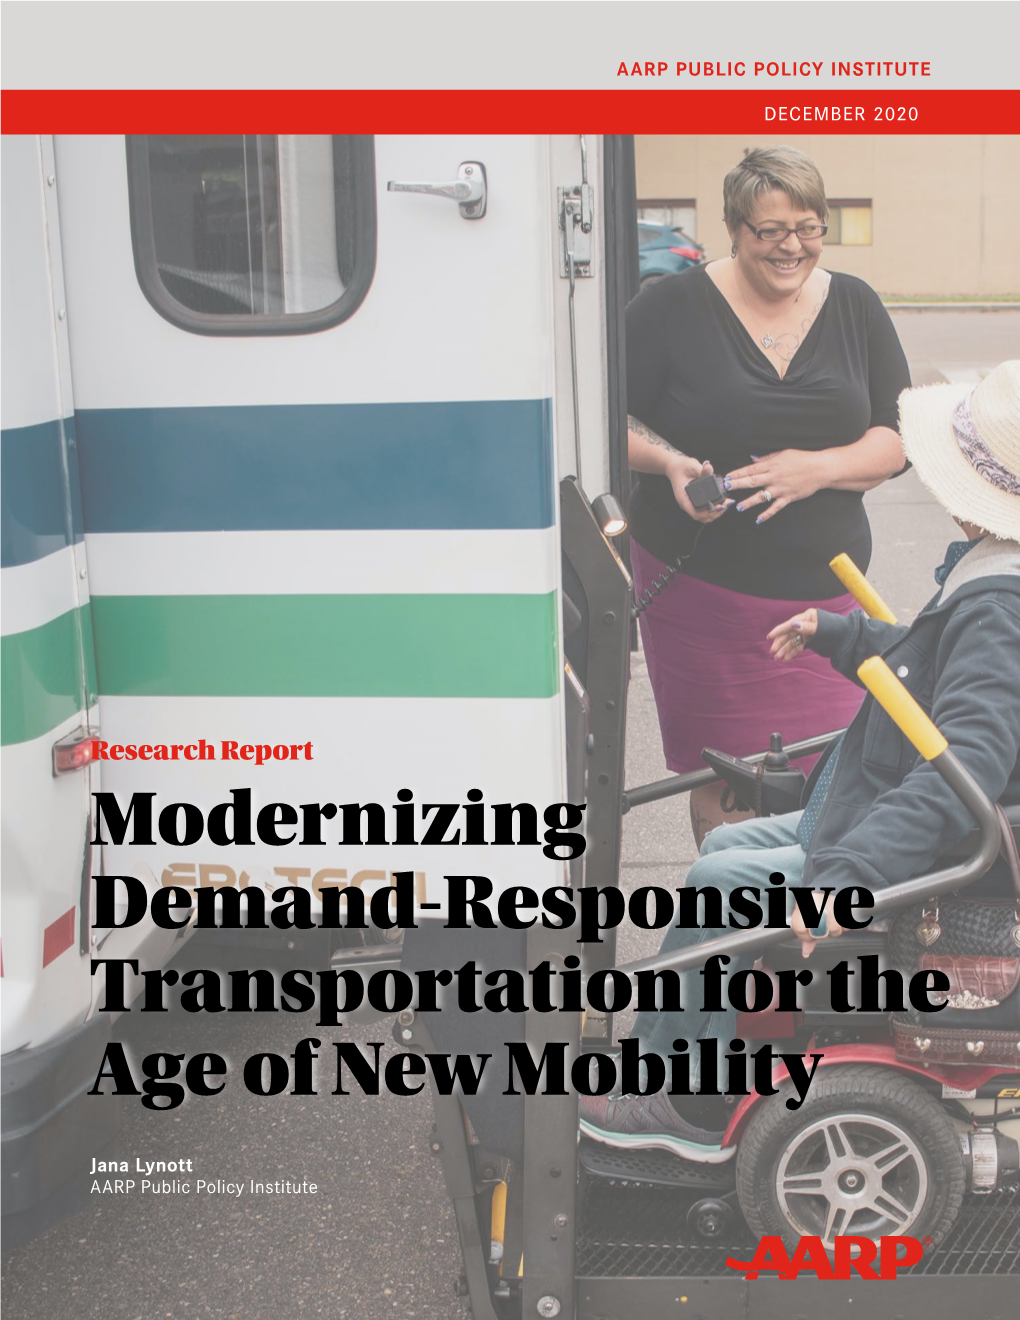 Modernizing Demand-Responsive Transportation for the Age of New Mobility